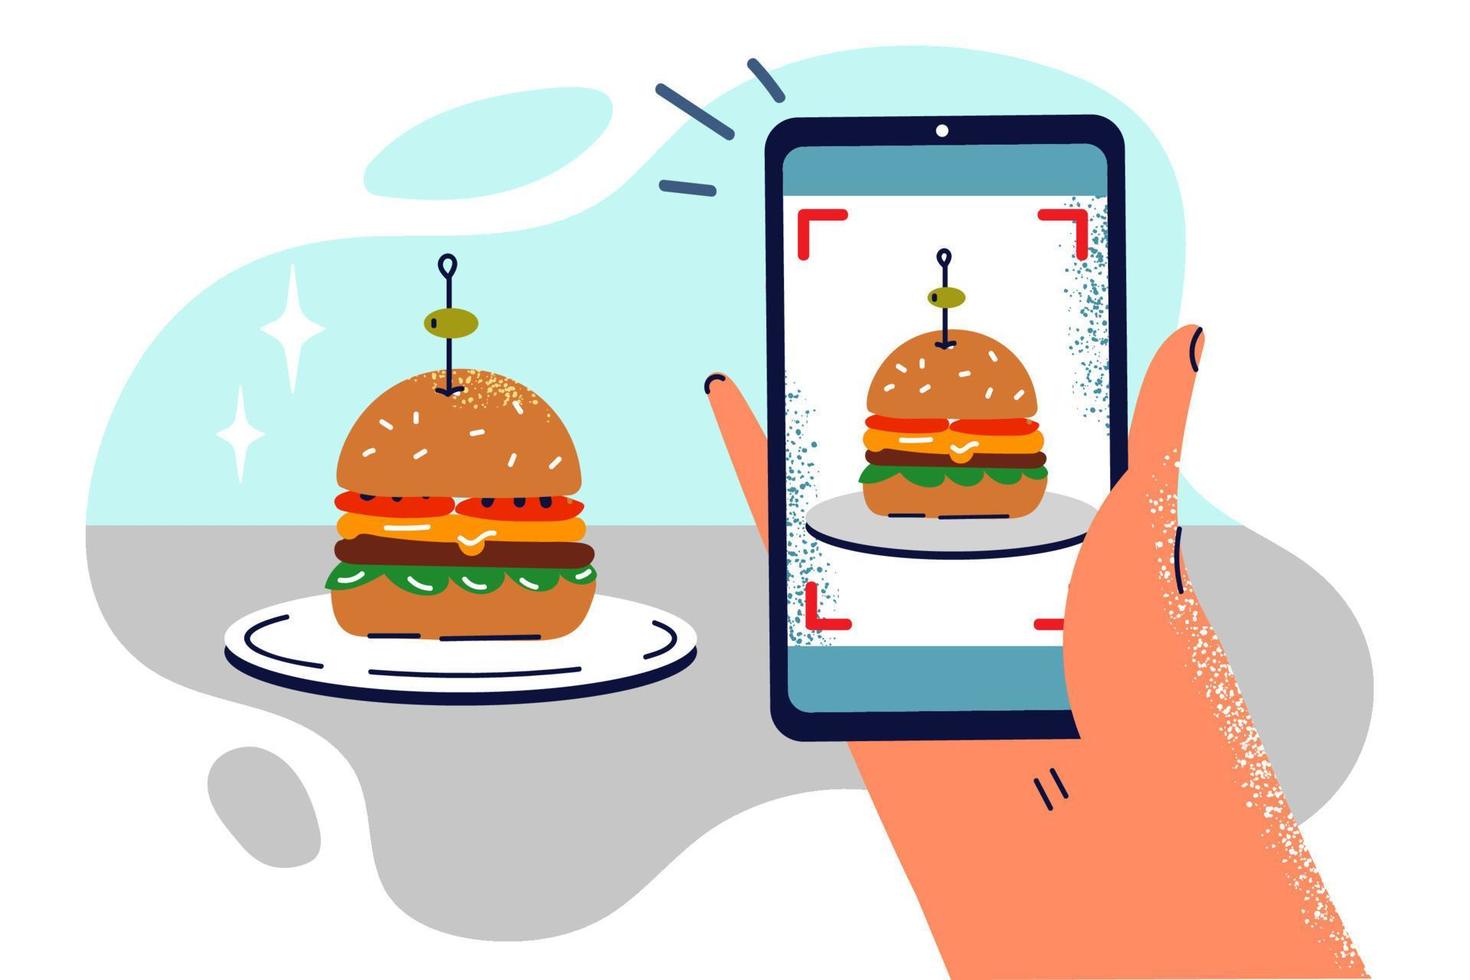 Hand with phone taking photo of hamburger on plate to share snapshot of lunch on social networks. Shooting hamburger on smartphone for online advertising or adding illustration to menu vector